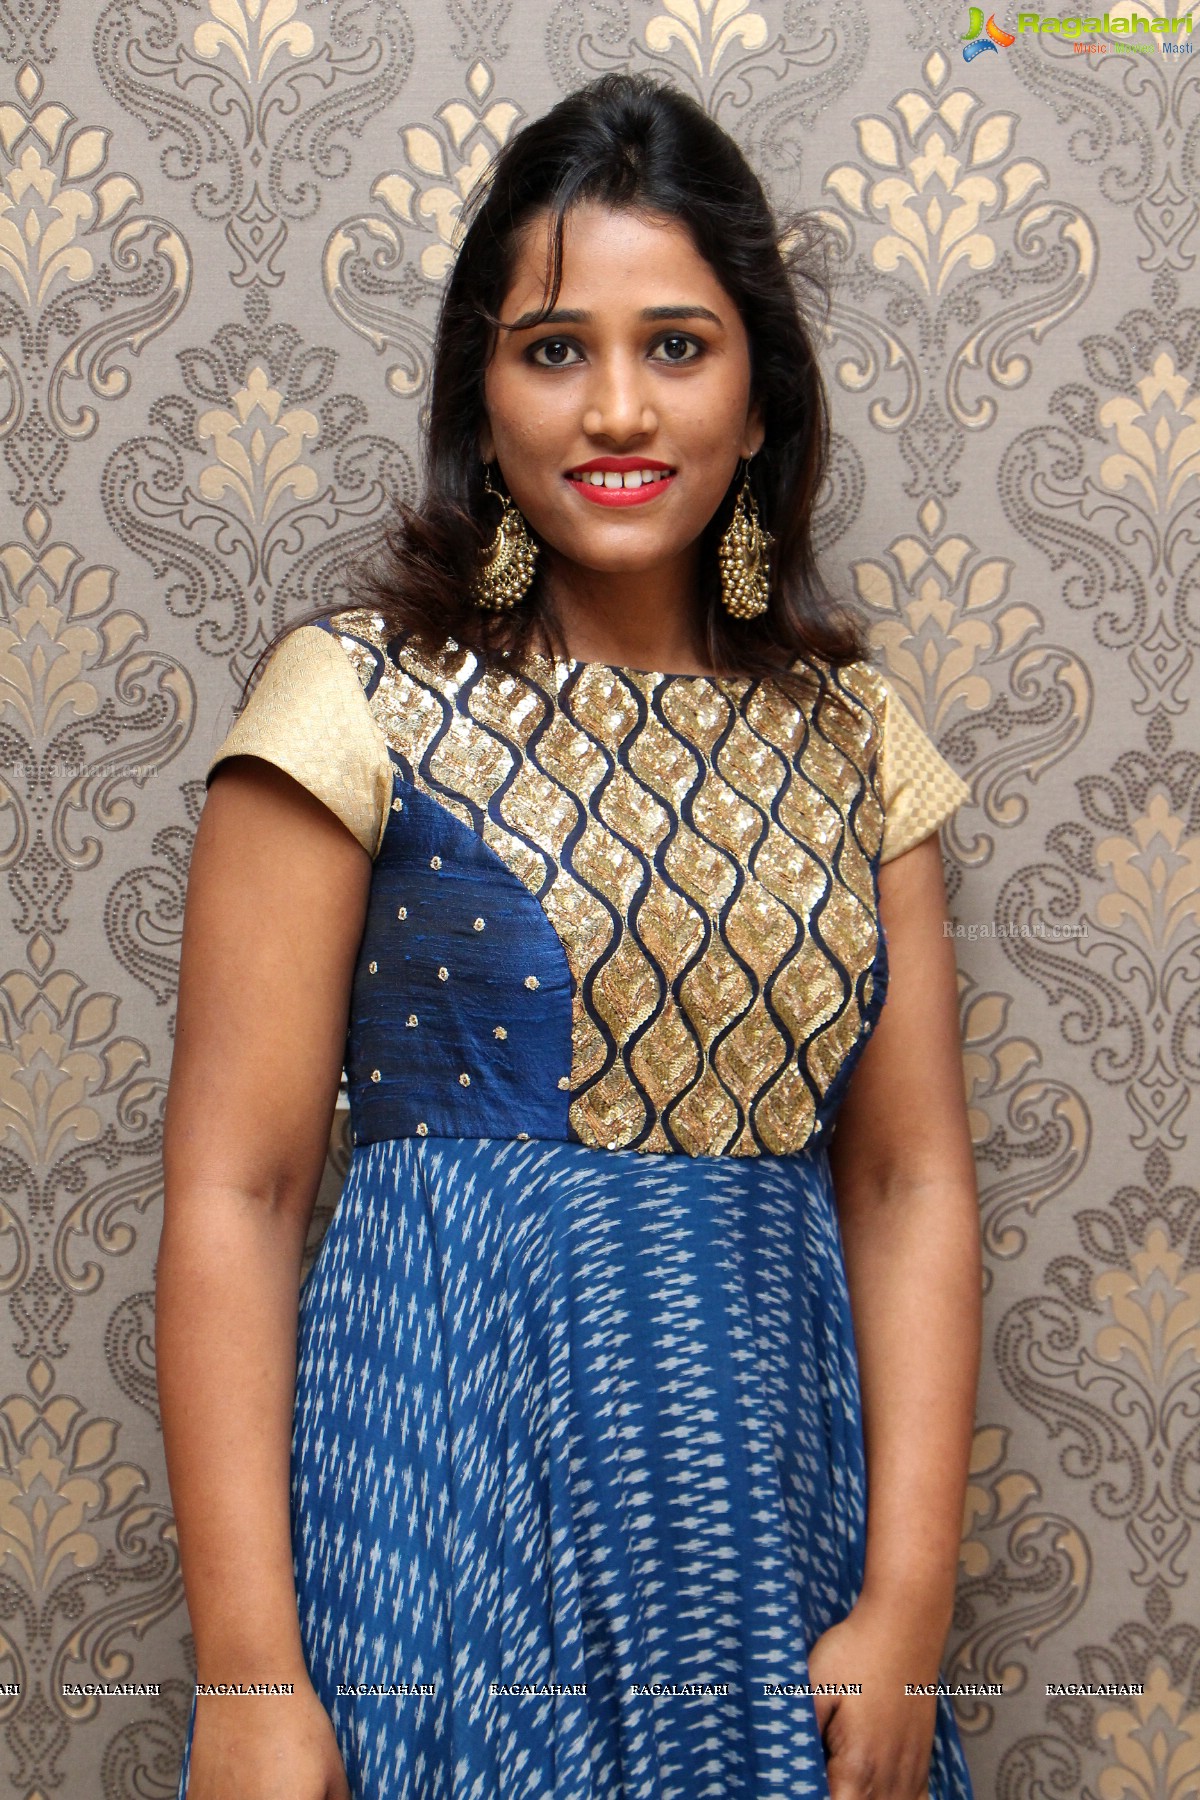 S Mode by Swetha Reddy and Suchi Reddy at Shrinika, Plot #213, Road No 19, Jubilee Hills, Hyderabad